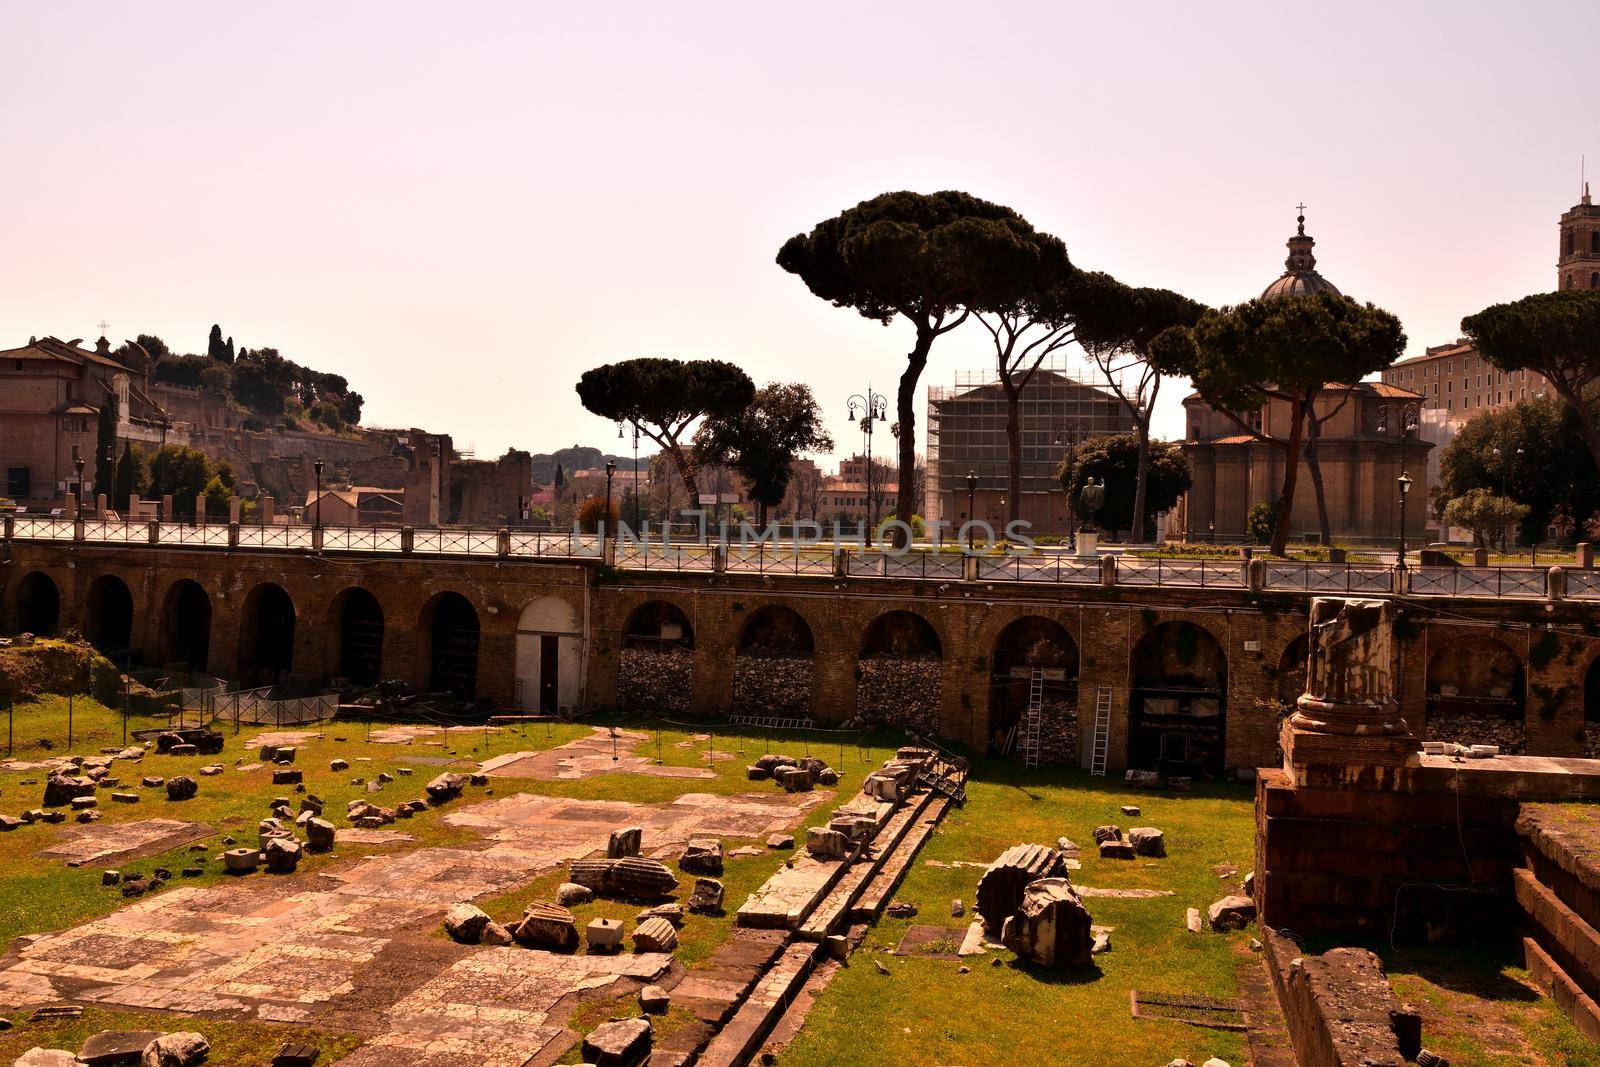 April 8th 2020, Rome, Italy: View of the Forum of Augustus and Imperial Forums street without tourists due to the lockdown